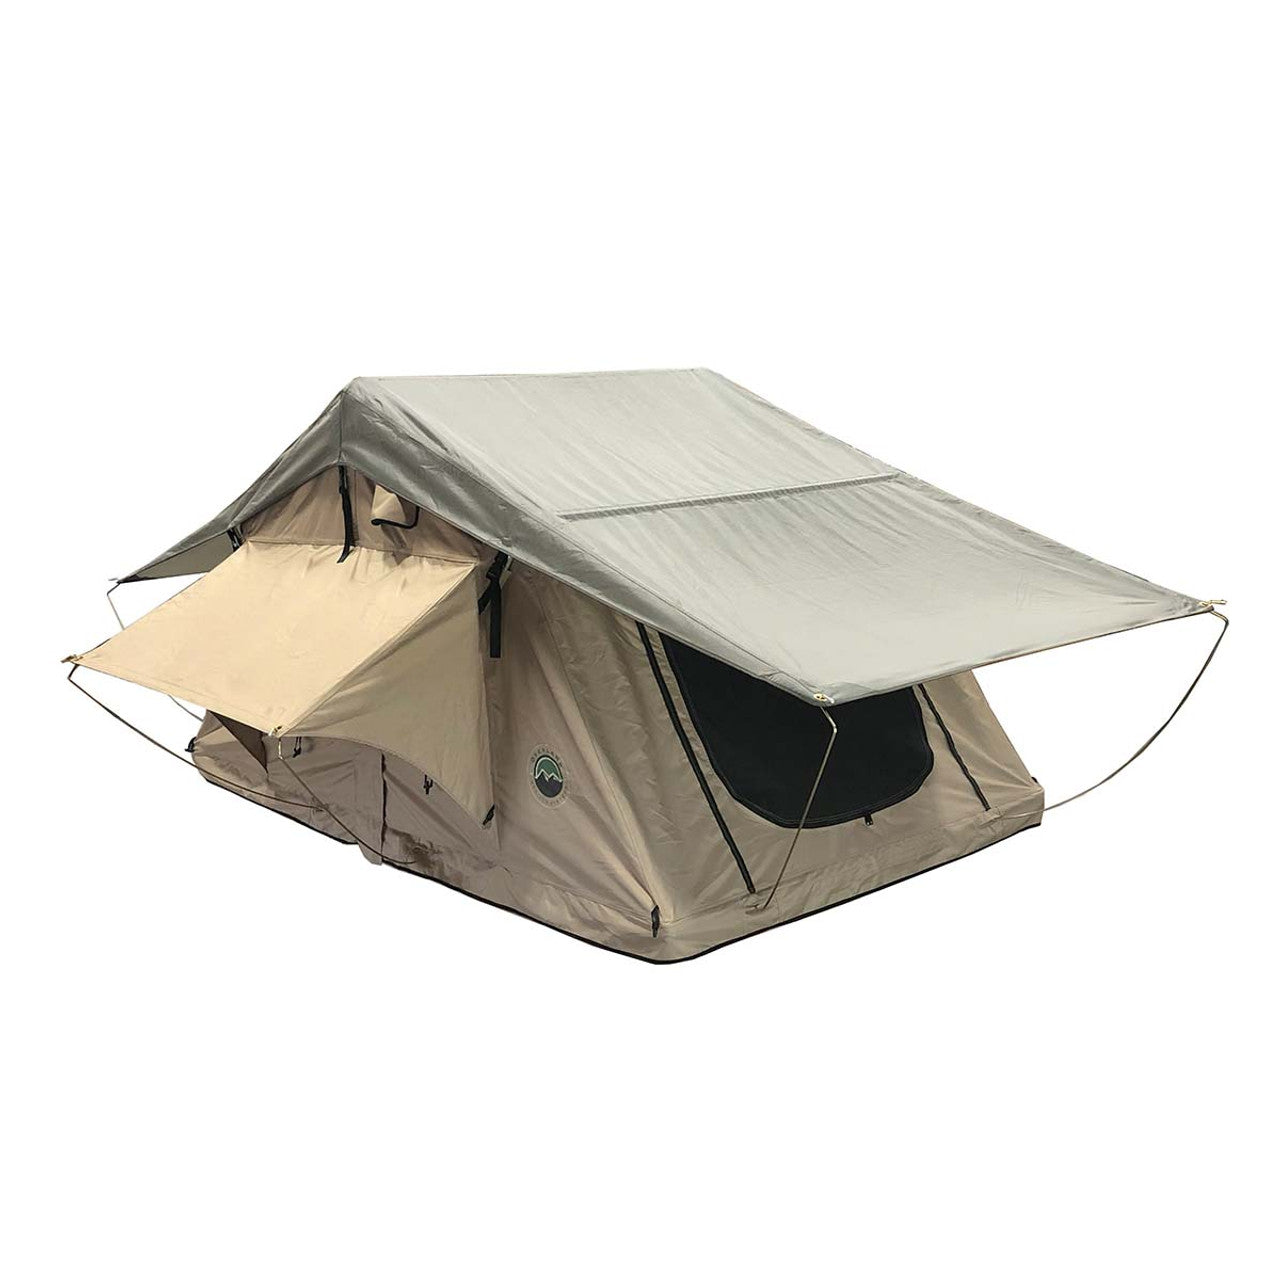 OVS TMBK 3 Person Roof Top Tent 18119733